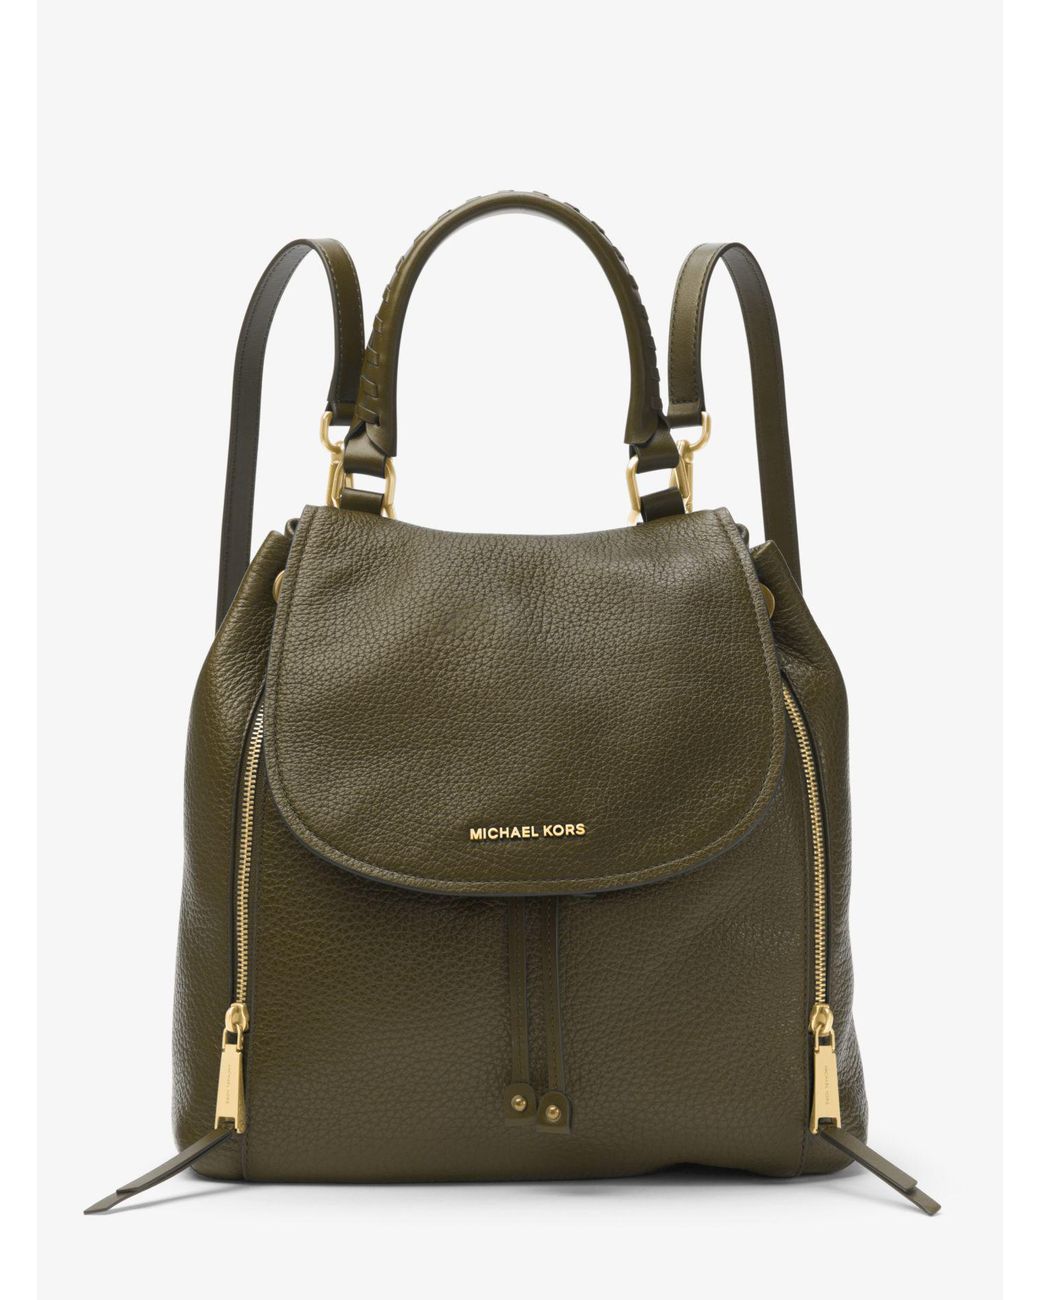 Michael Kors Viv Large Leather Backpack in Green | Lyst Canada